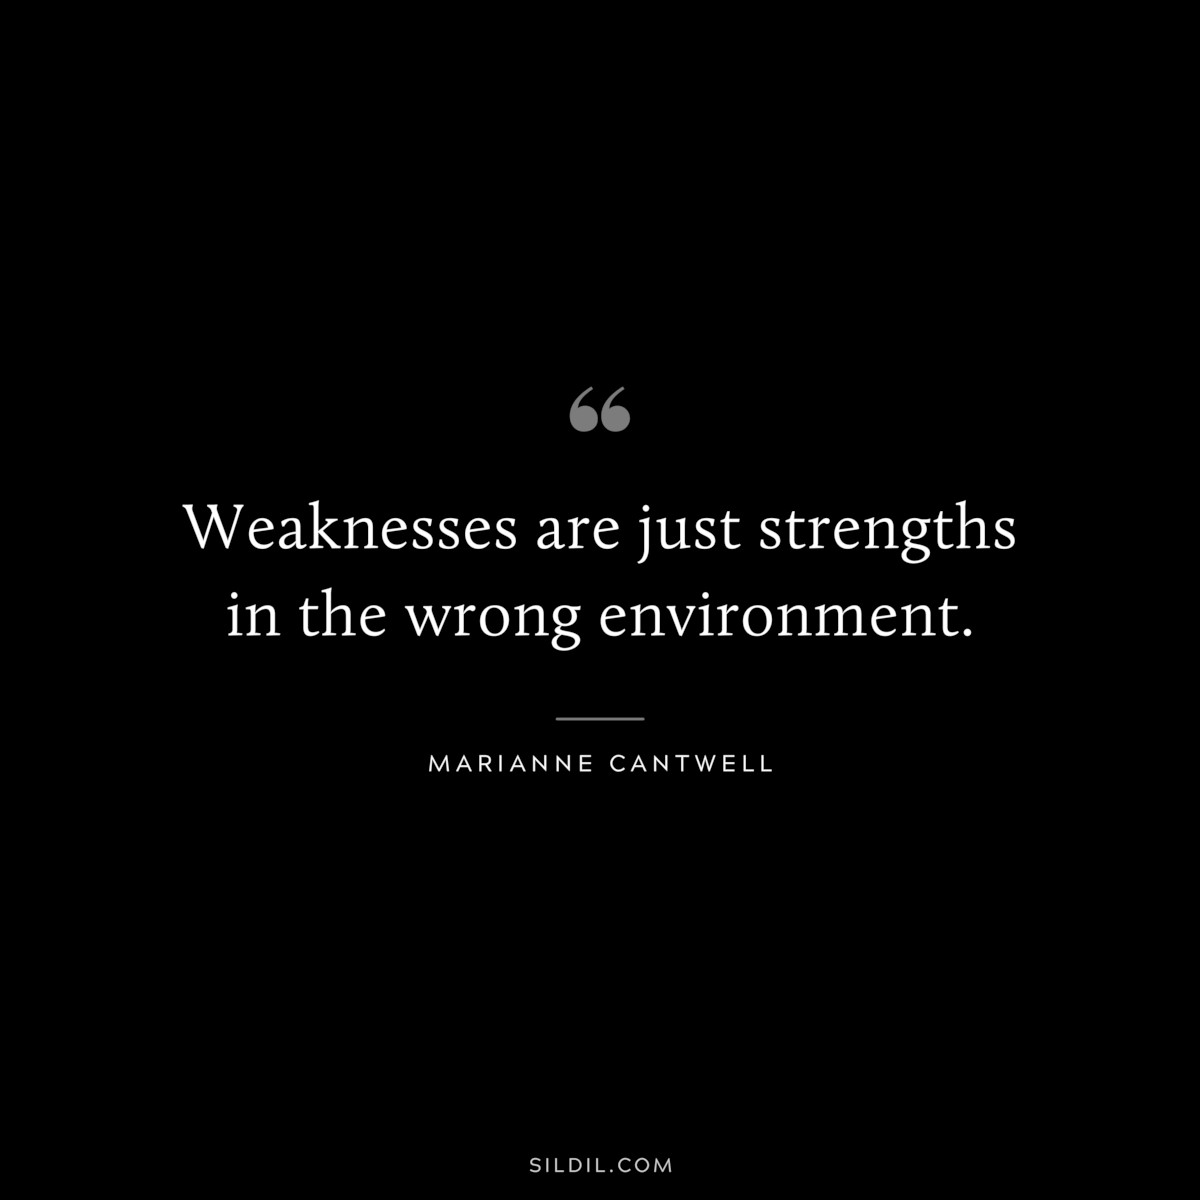 Weaknesses are just strengths in the wrong environment. ― Marianne Cantwell